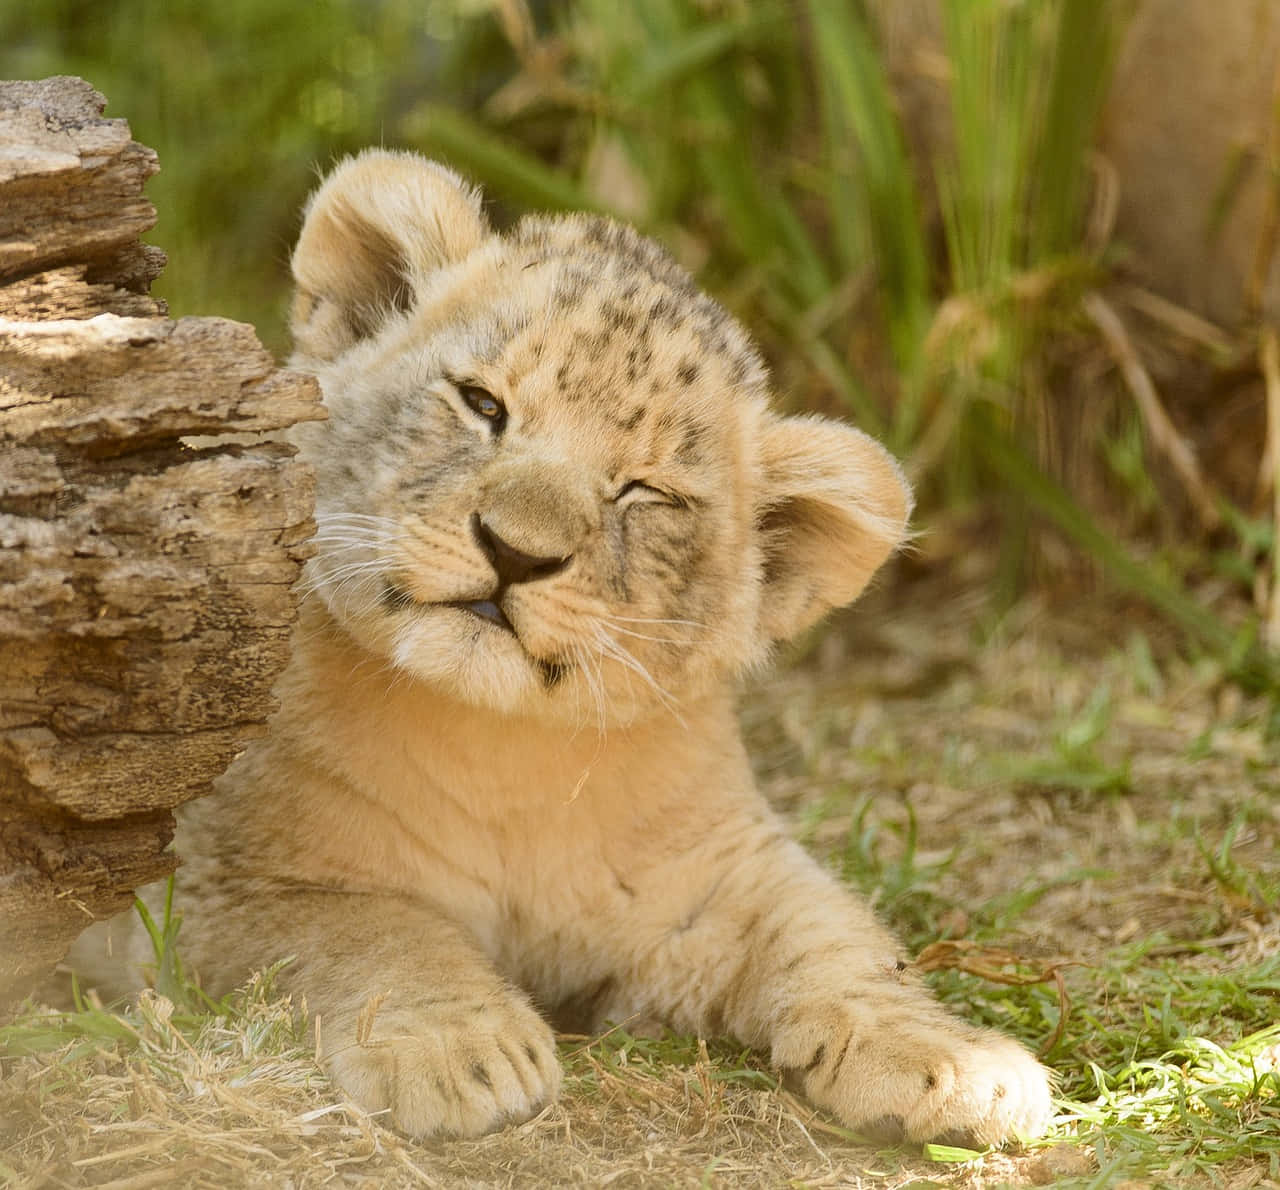 A cute baby lion looks off into the distance.